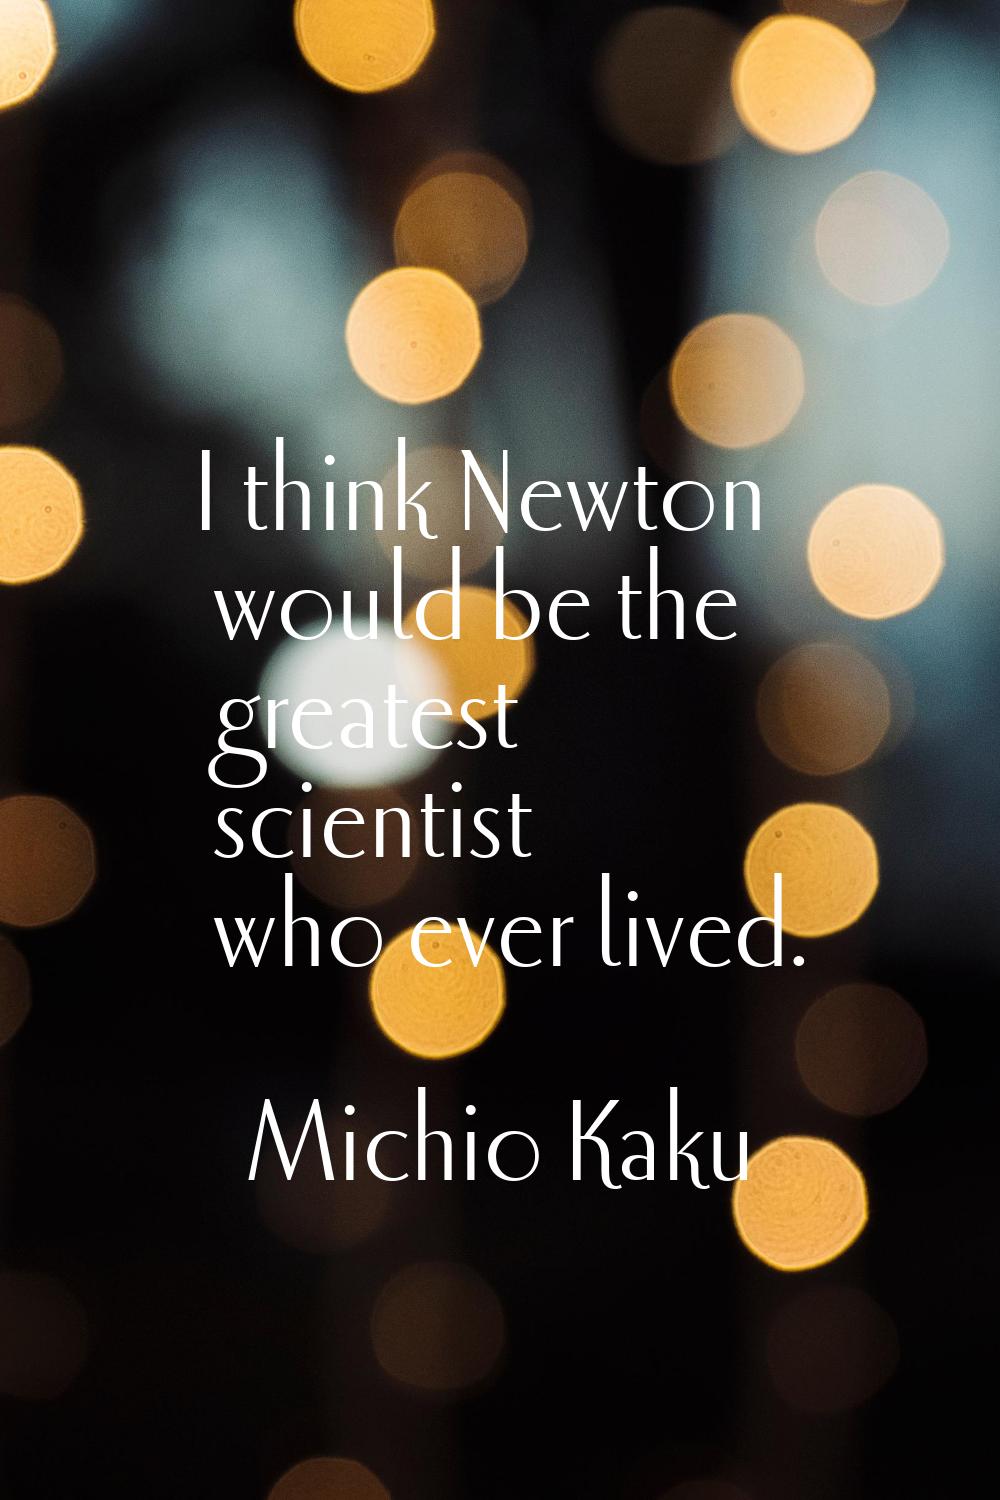 I think Newton would be the greatest scientist who ever lived.